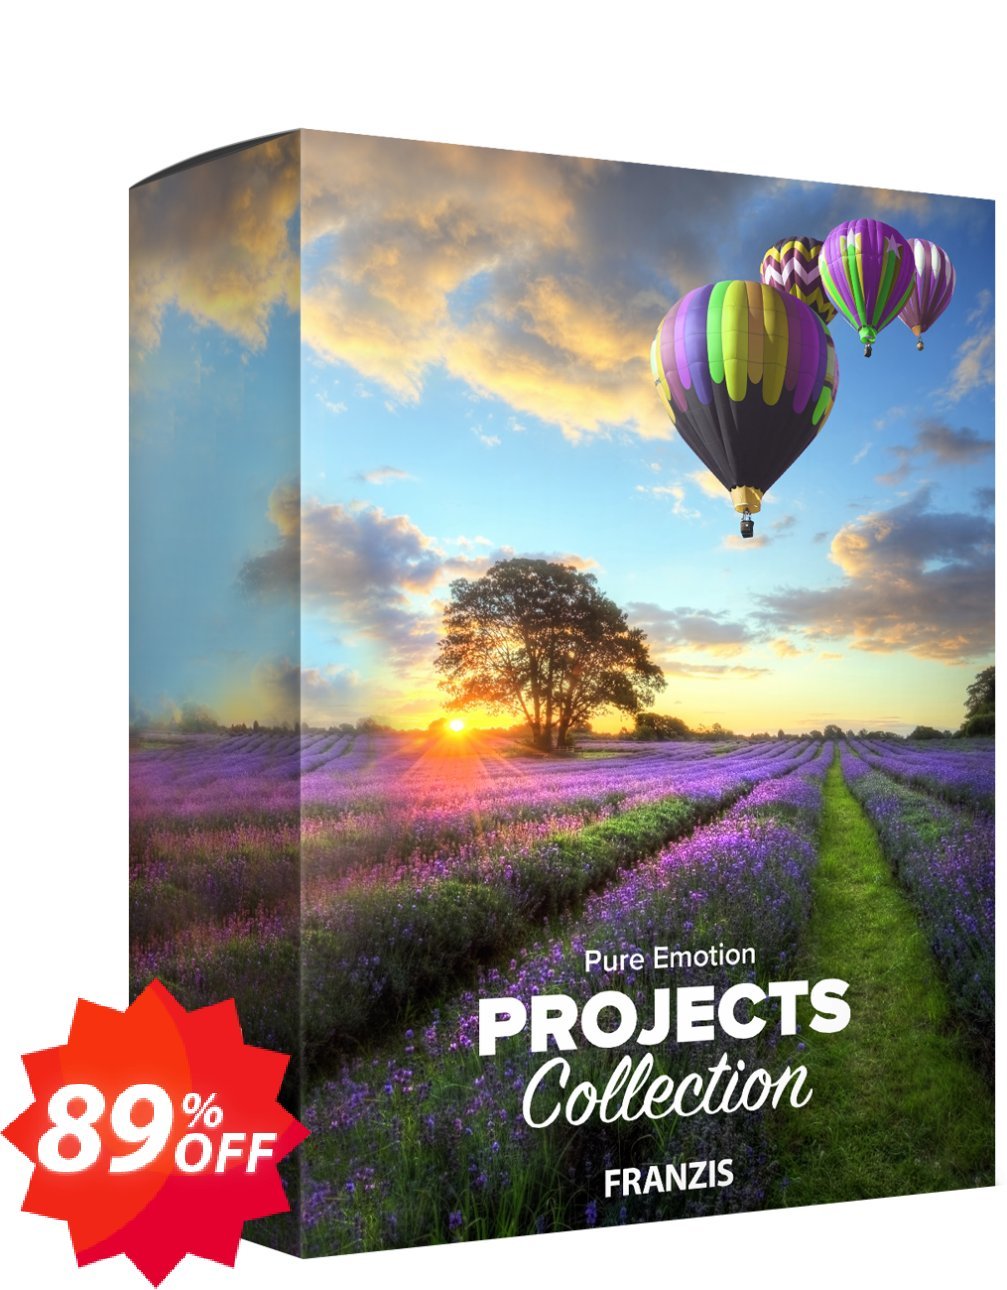 Pure Emotion Projects Collection Coupon code 89% discount 